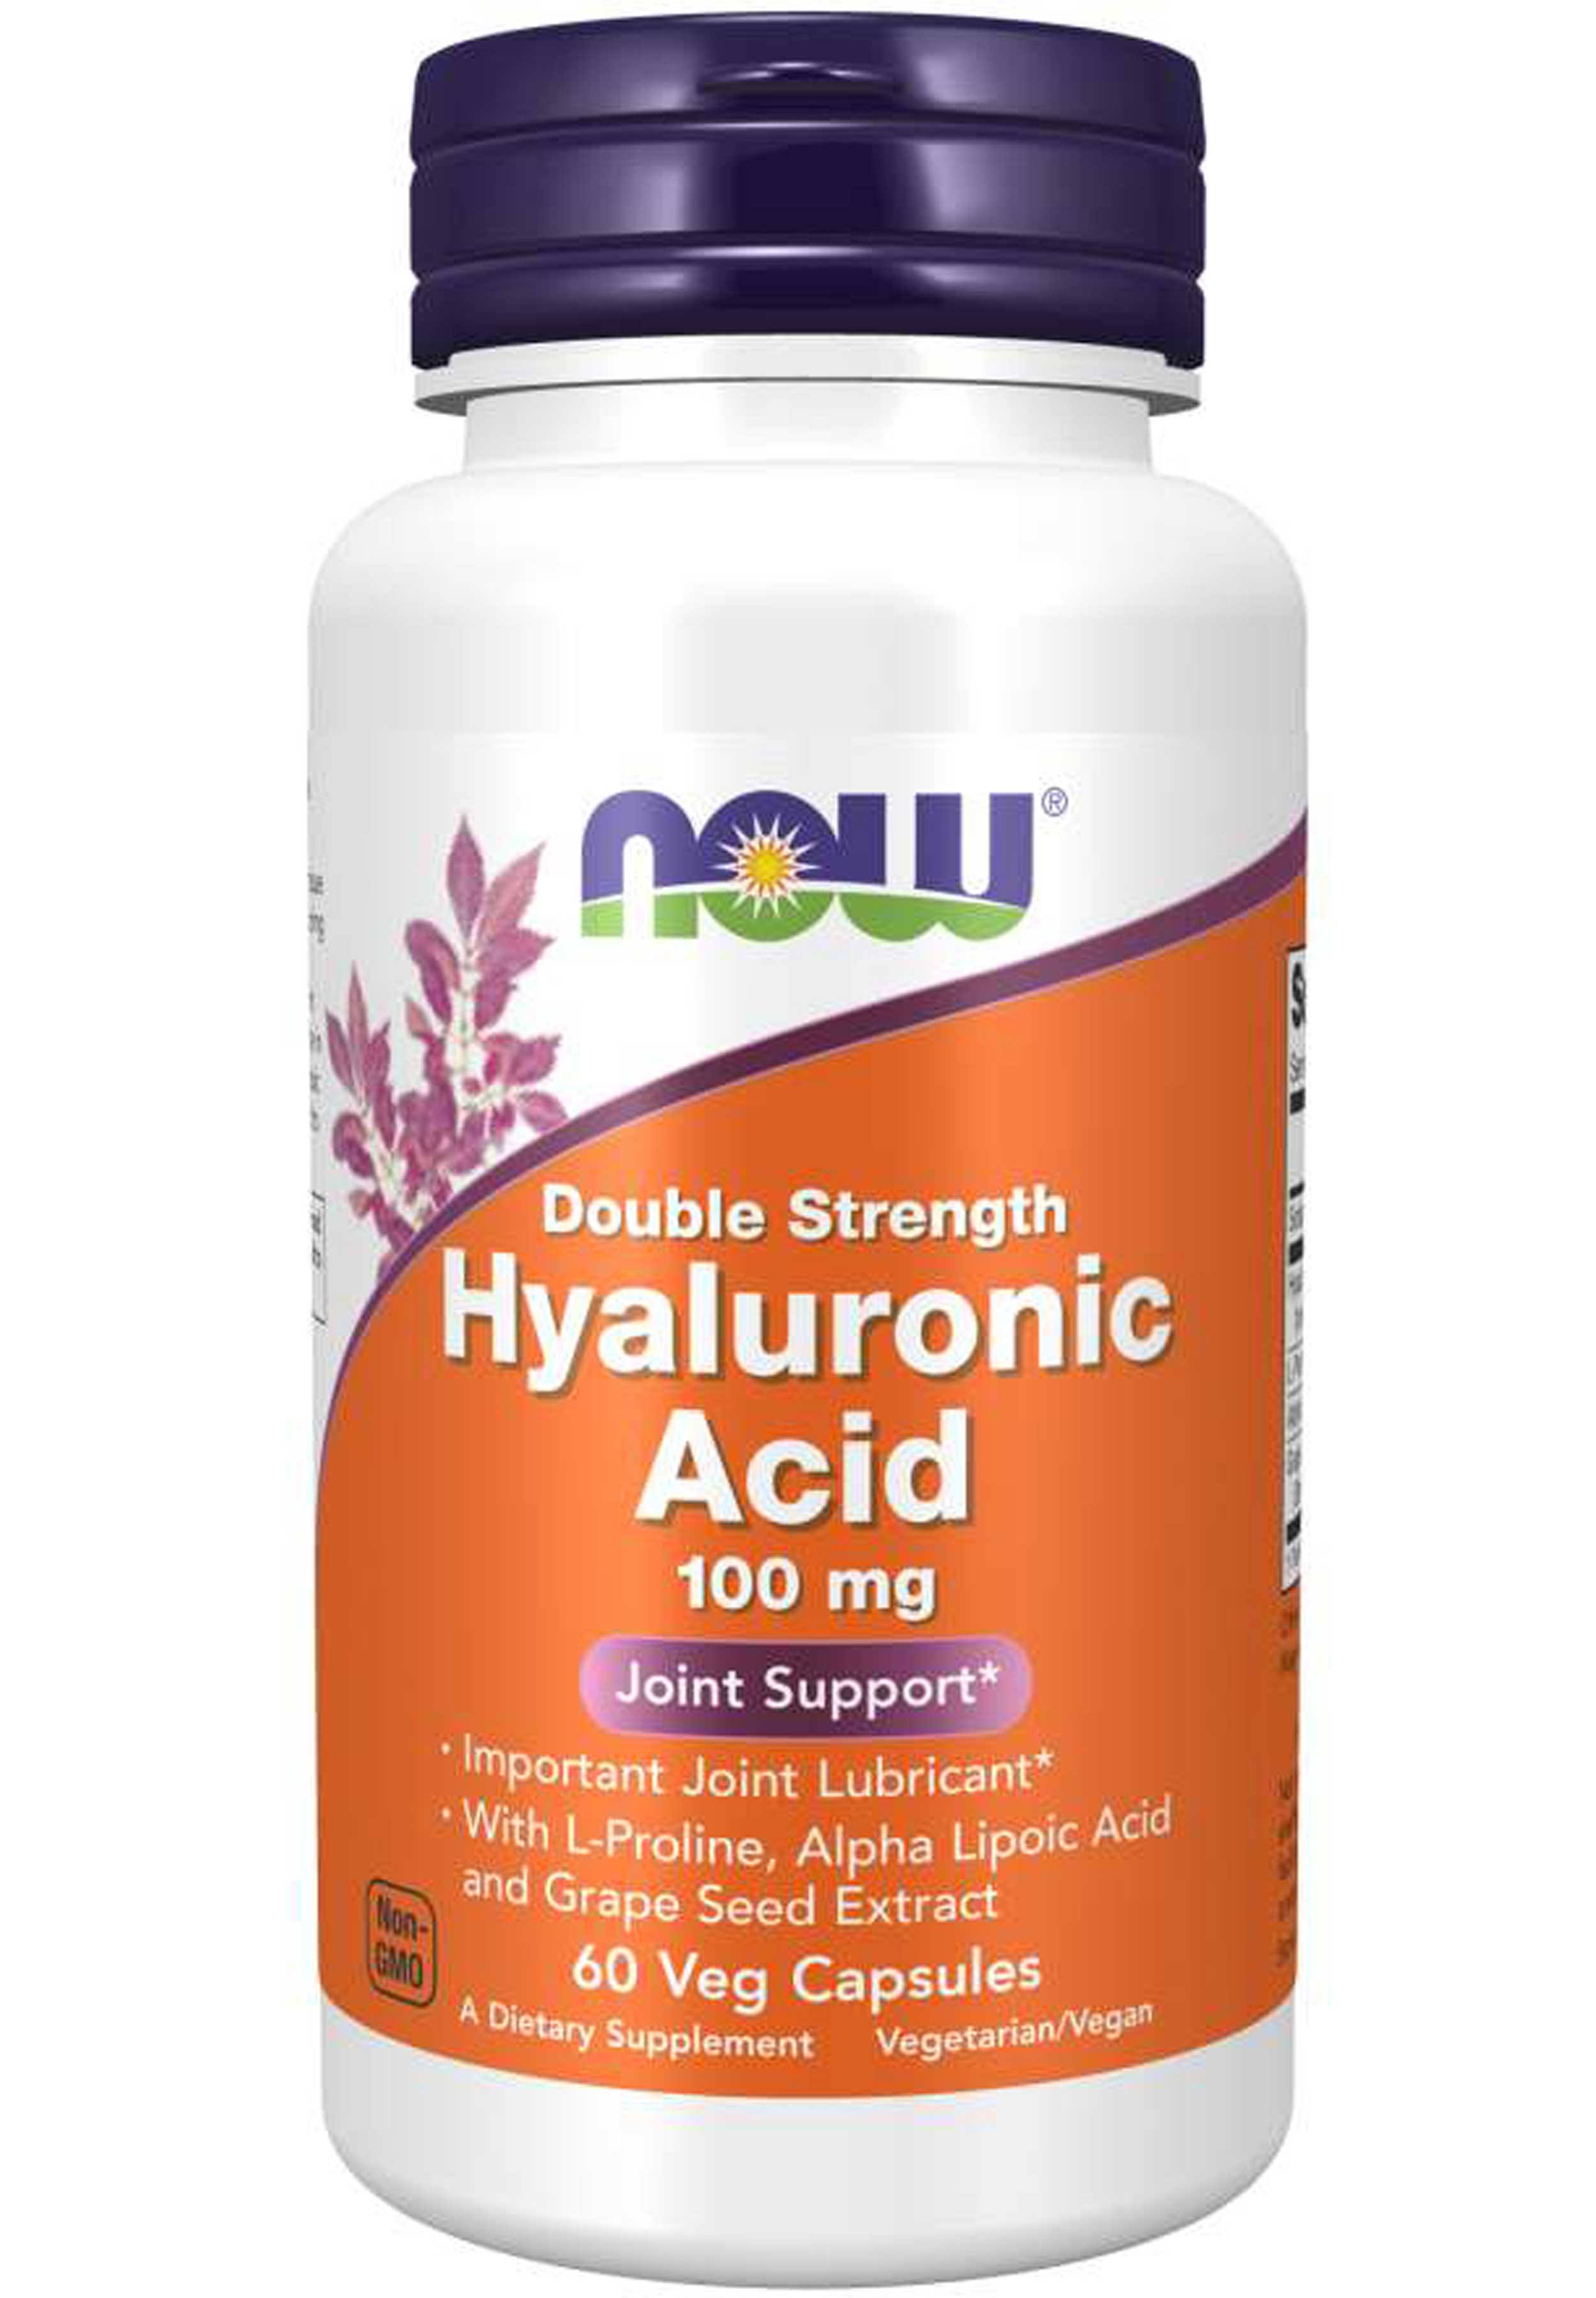 Now Foods Hyaluronic Acid - 100mg, 60 Vcaps